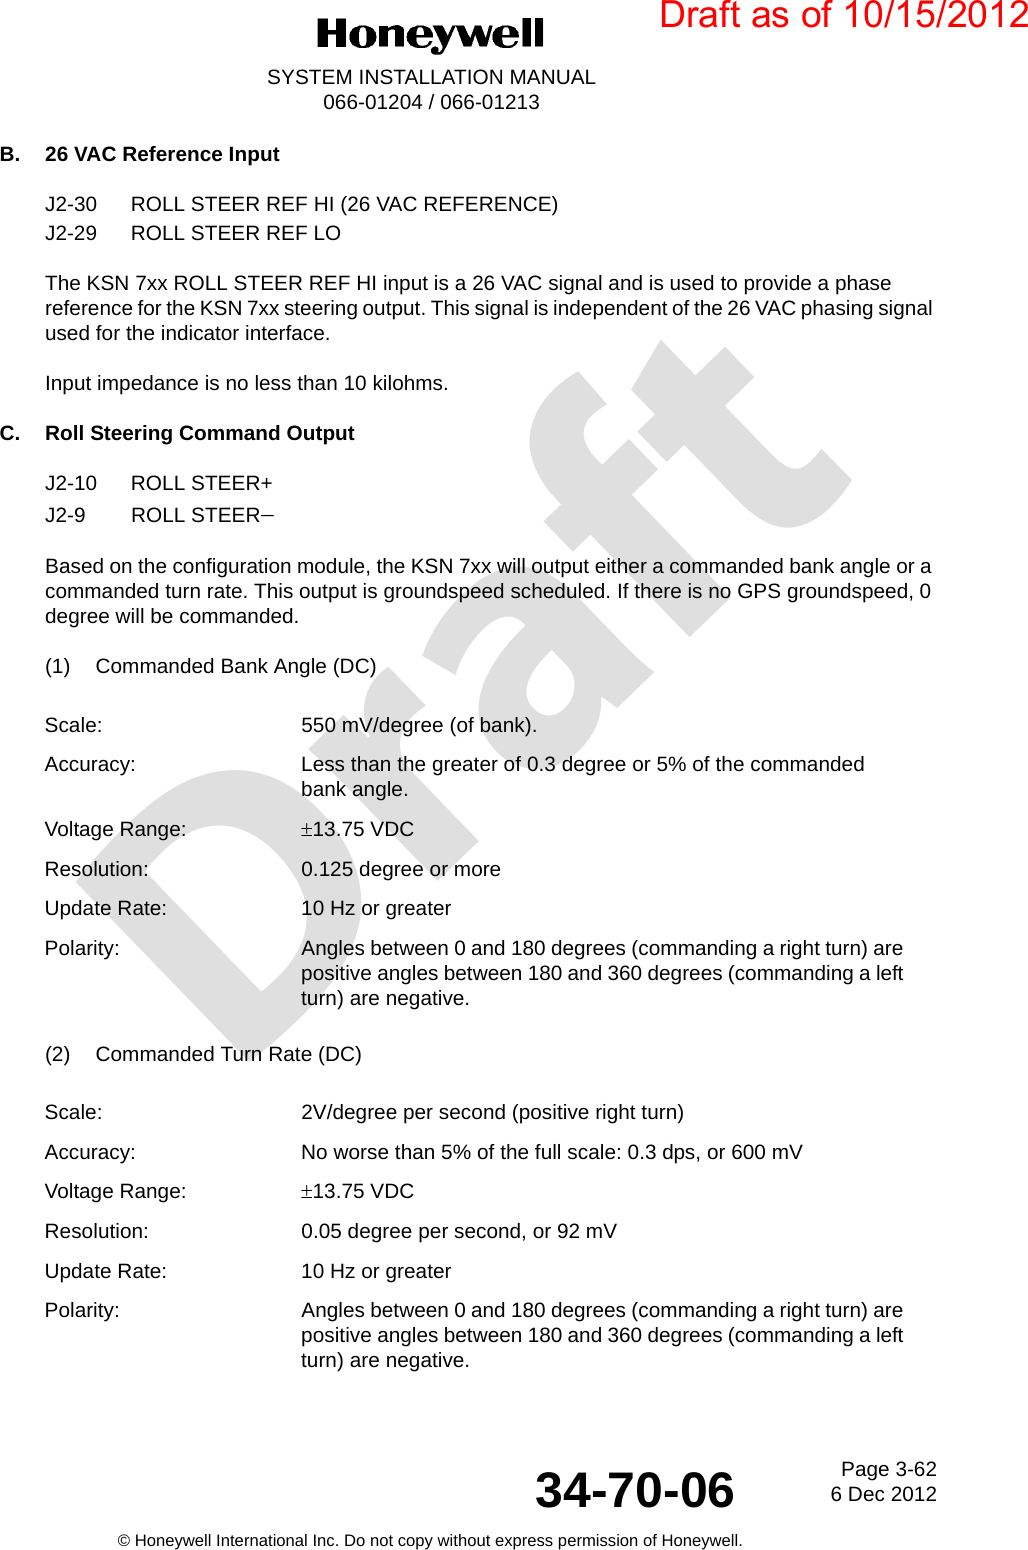 DraftPage 3-626 Dec 201234-70-06SYSTEM INSTALLATION MANUAL066-01204 / 066-01213© Honeywell International Inc. Do not copy without express permission of Honeywell.B. 26 VAC Reference InputJ2-30 ROLL STEER REF HI (26 VAC REFERENCE)J2-29 ROLL STEER REF LOThe KSN 7xx ROLL STEER REF HI input is a 26 VAC signal and is used to provide a phase reference for the KSN 7xx steering output. This signal is independent of the 26 VAC phasing signal used for the indicator interface.Input impedance is no less than 10 kilohms.C. Roll Steering Command OutputJ2-10 ROLL STEER+J2-9 ROLL STEERBased on the configuration module, the KSN 7xx will output either a commanded bank angle or a commanded turn rate. This output is groundspeed scheduled. If there is no GPS groundspeed, 0 degree will be commanded.(1) Commanded Bank Angle (DC)(2) Commanded Turn Rate (DC)Scale: 550 mV/degree (of bank).Accuracy: Less than the greater of 0.3 degree or 5% of the commanded bank angle.Voltage Range: 13.75 VDCResolution: 0.125 degree or moreUpdate Rate: 10 Hz or greaterPolarity: Angles between 0 and 180 degrees (commanding a right turn) are positive angles between 180 and 360 degrees (commanding a left turn) are negative.Scale: 2V/degree per second (positive right turn) Accuracy: No worse than 5% of the full scale: 0.3 dps, or 600 mVVoltage Range: 13.75 VDCResolution: 0.05 degree per second, or 92 mVUpdate Rate: 10 Hz or greaterPolarity: Angles between 0 and 180 degrees (commanding a right turn) are positive angles between 180 and 360 degrees (commanding a left turn) are negative.Draft as of 10/15/2012